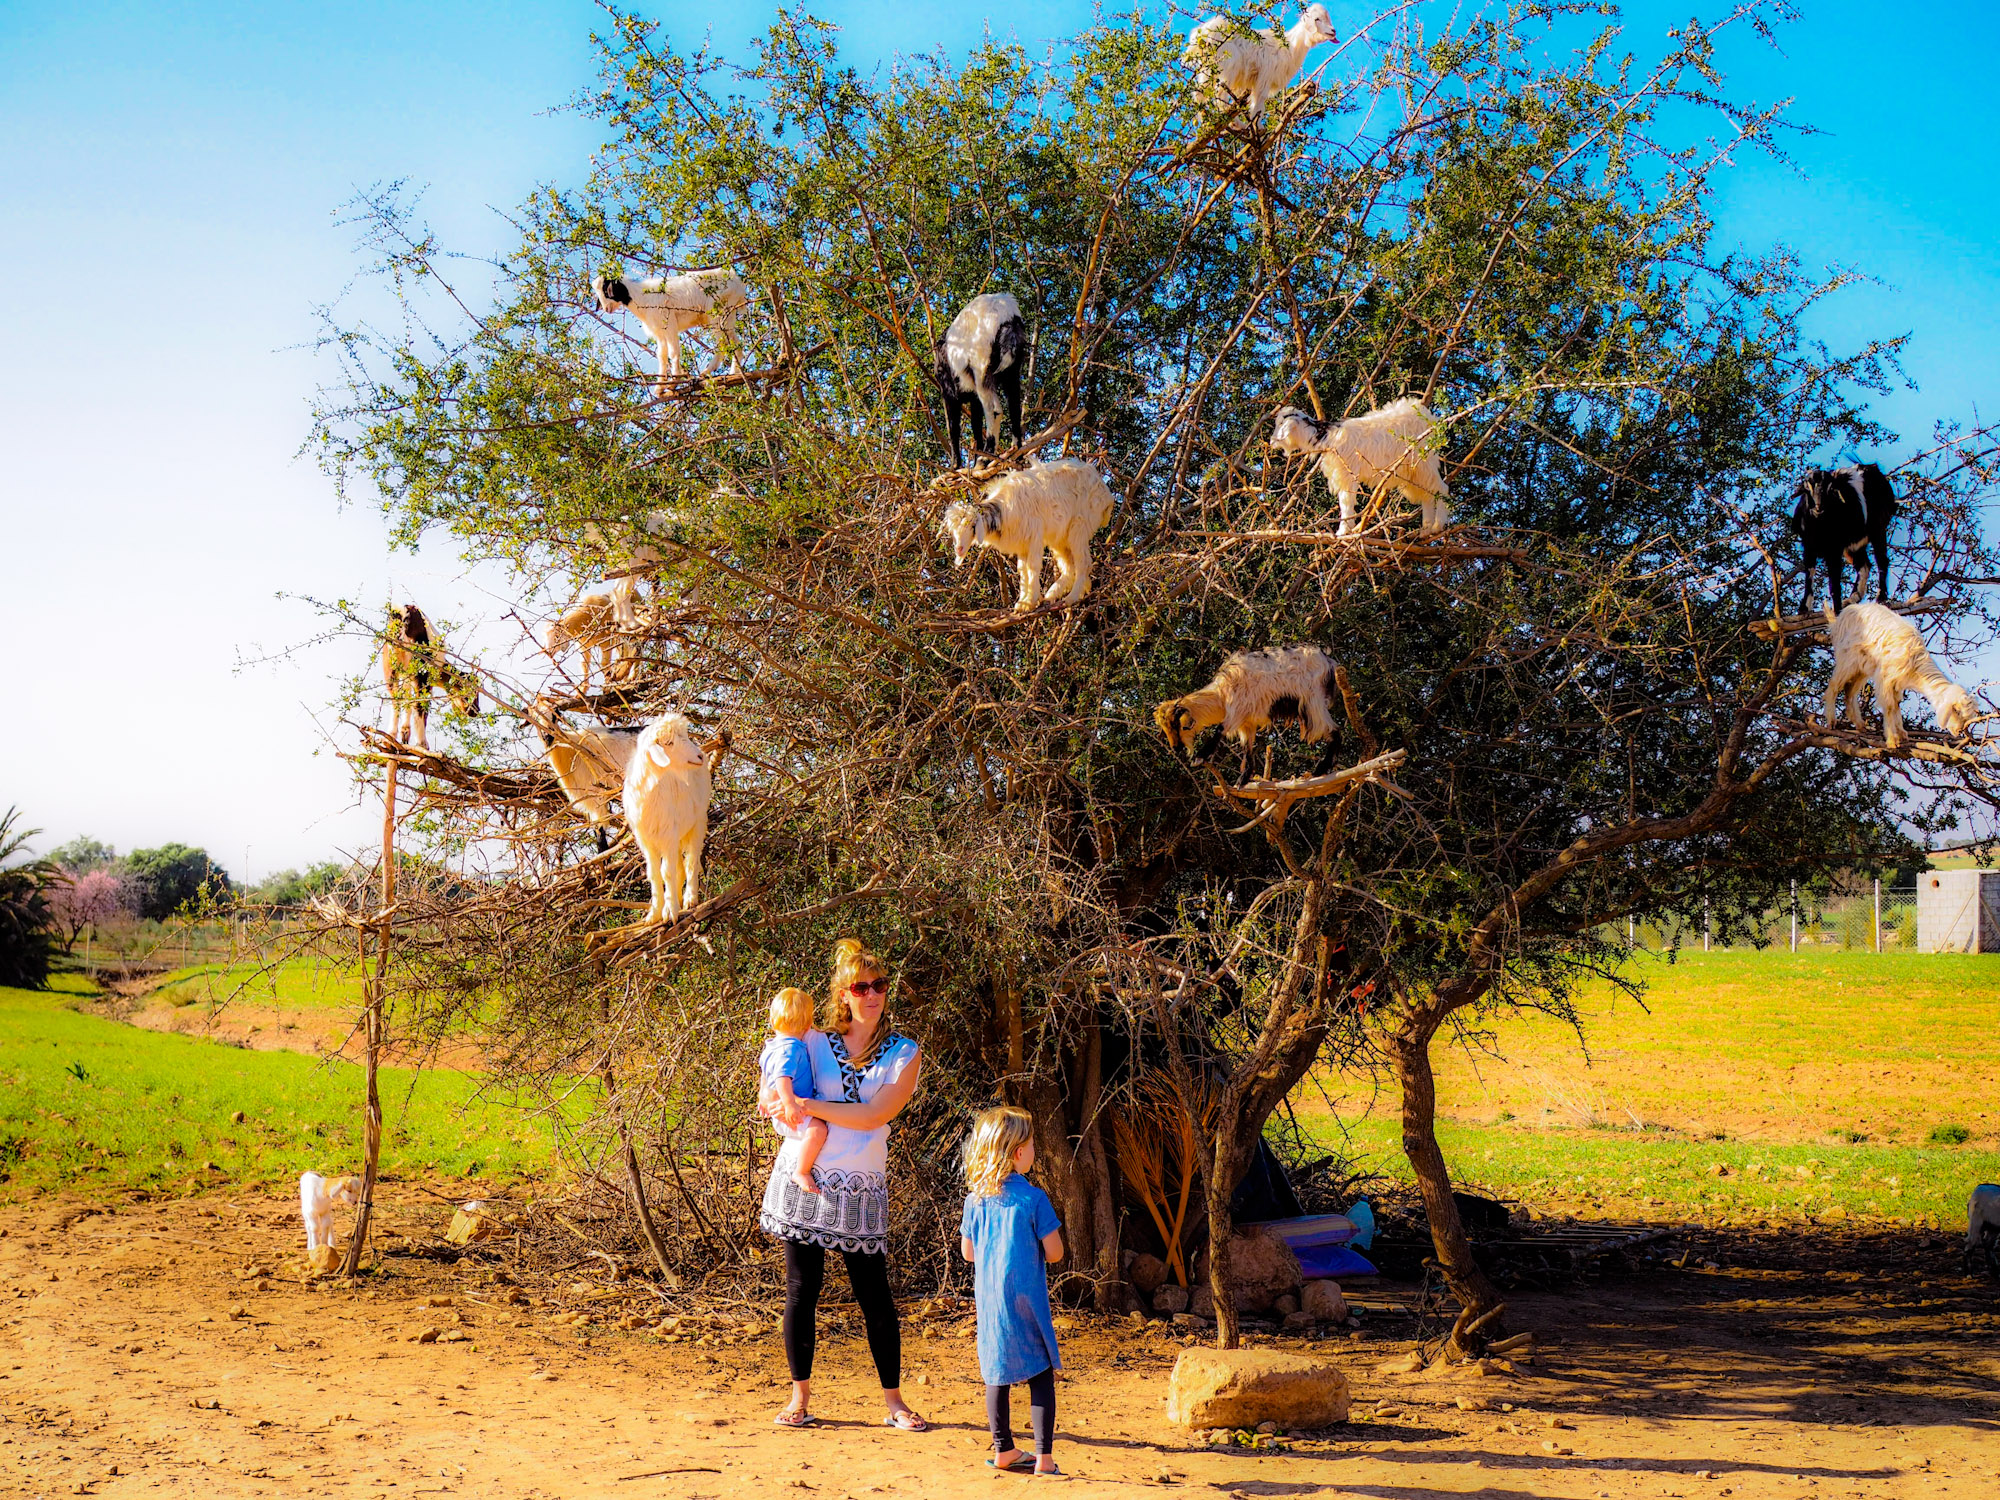 The famous 'goat tree' - an Argan tree with many goats grazing up on the branches of the tree